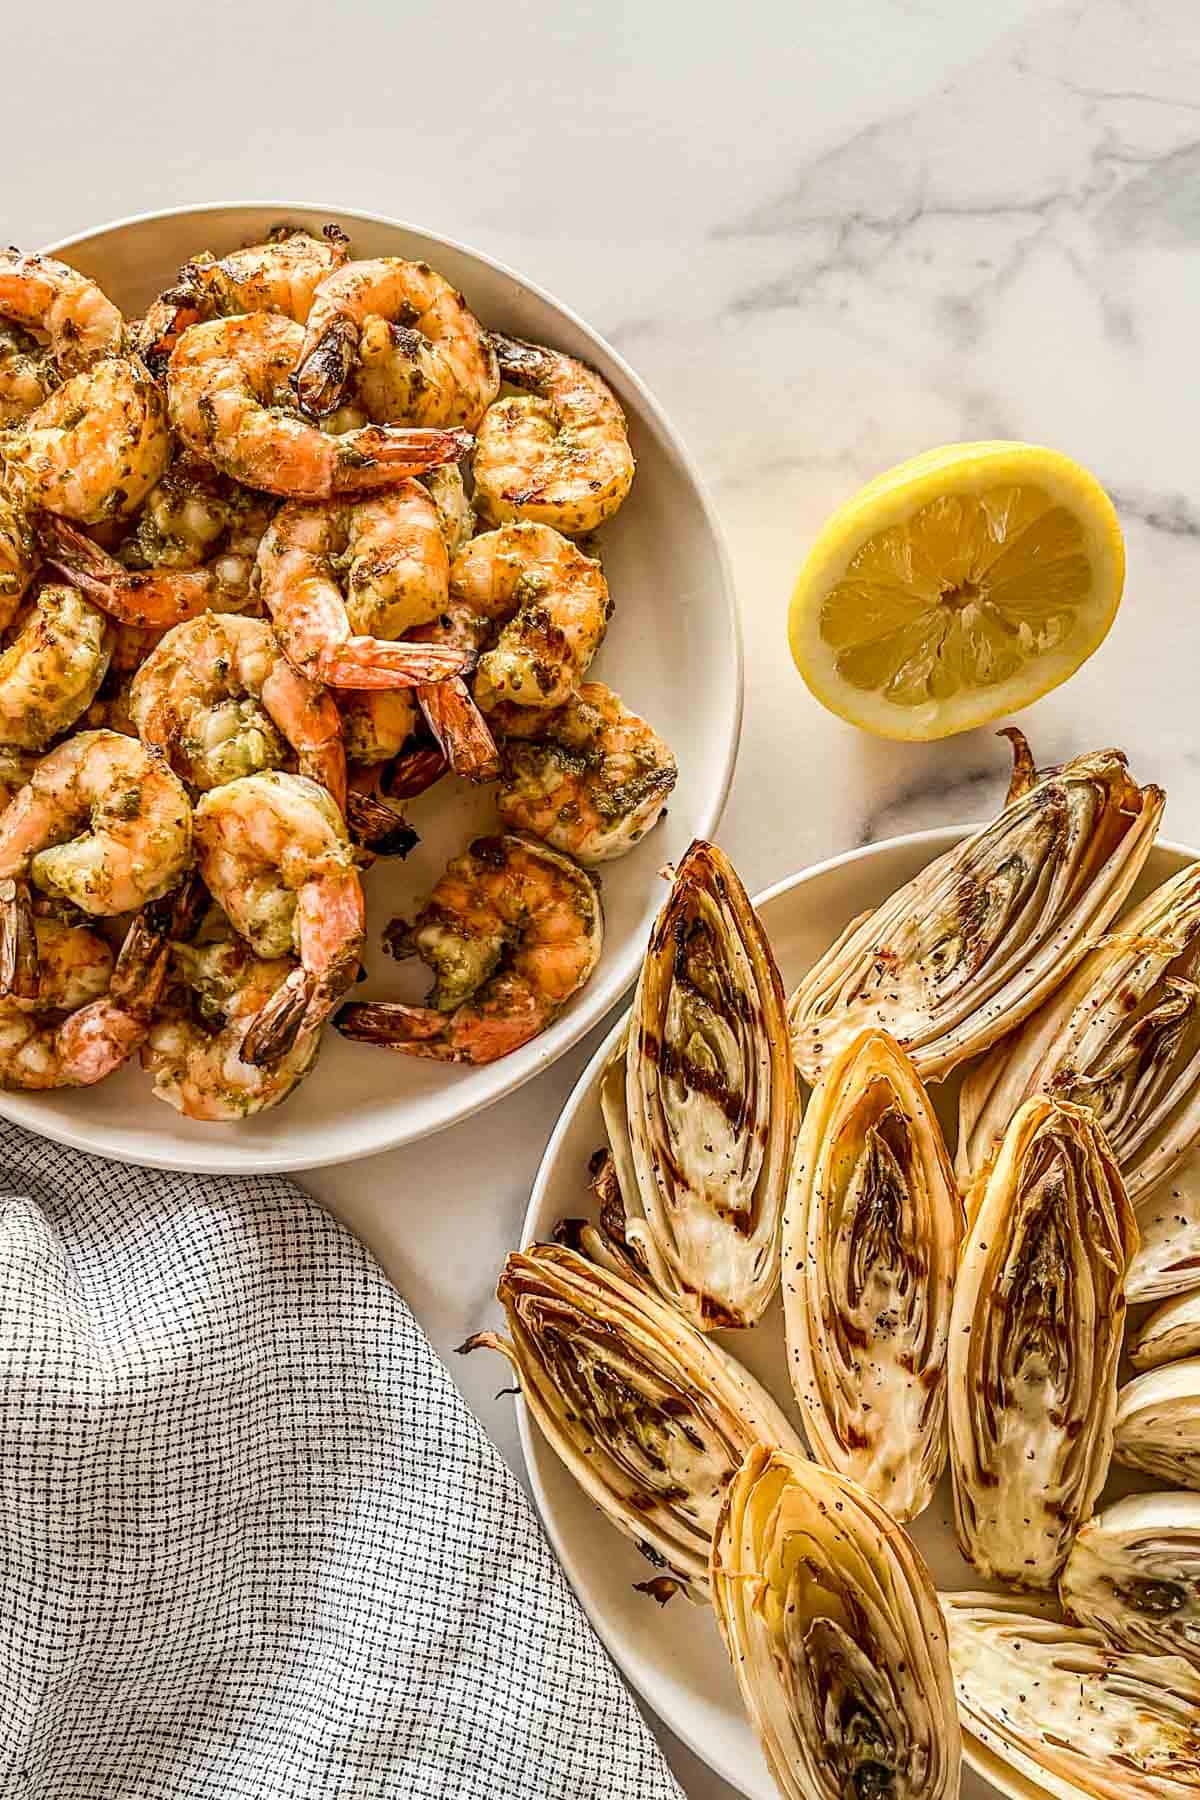 A large bowl of pesto grilled shrimp next to a plate of grilled endives.